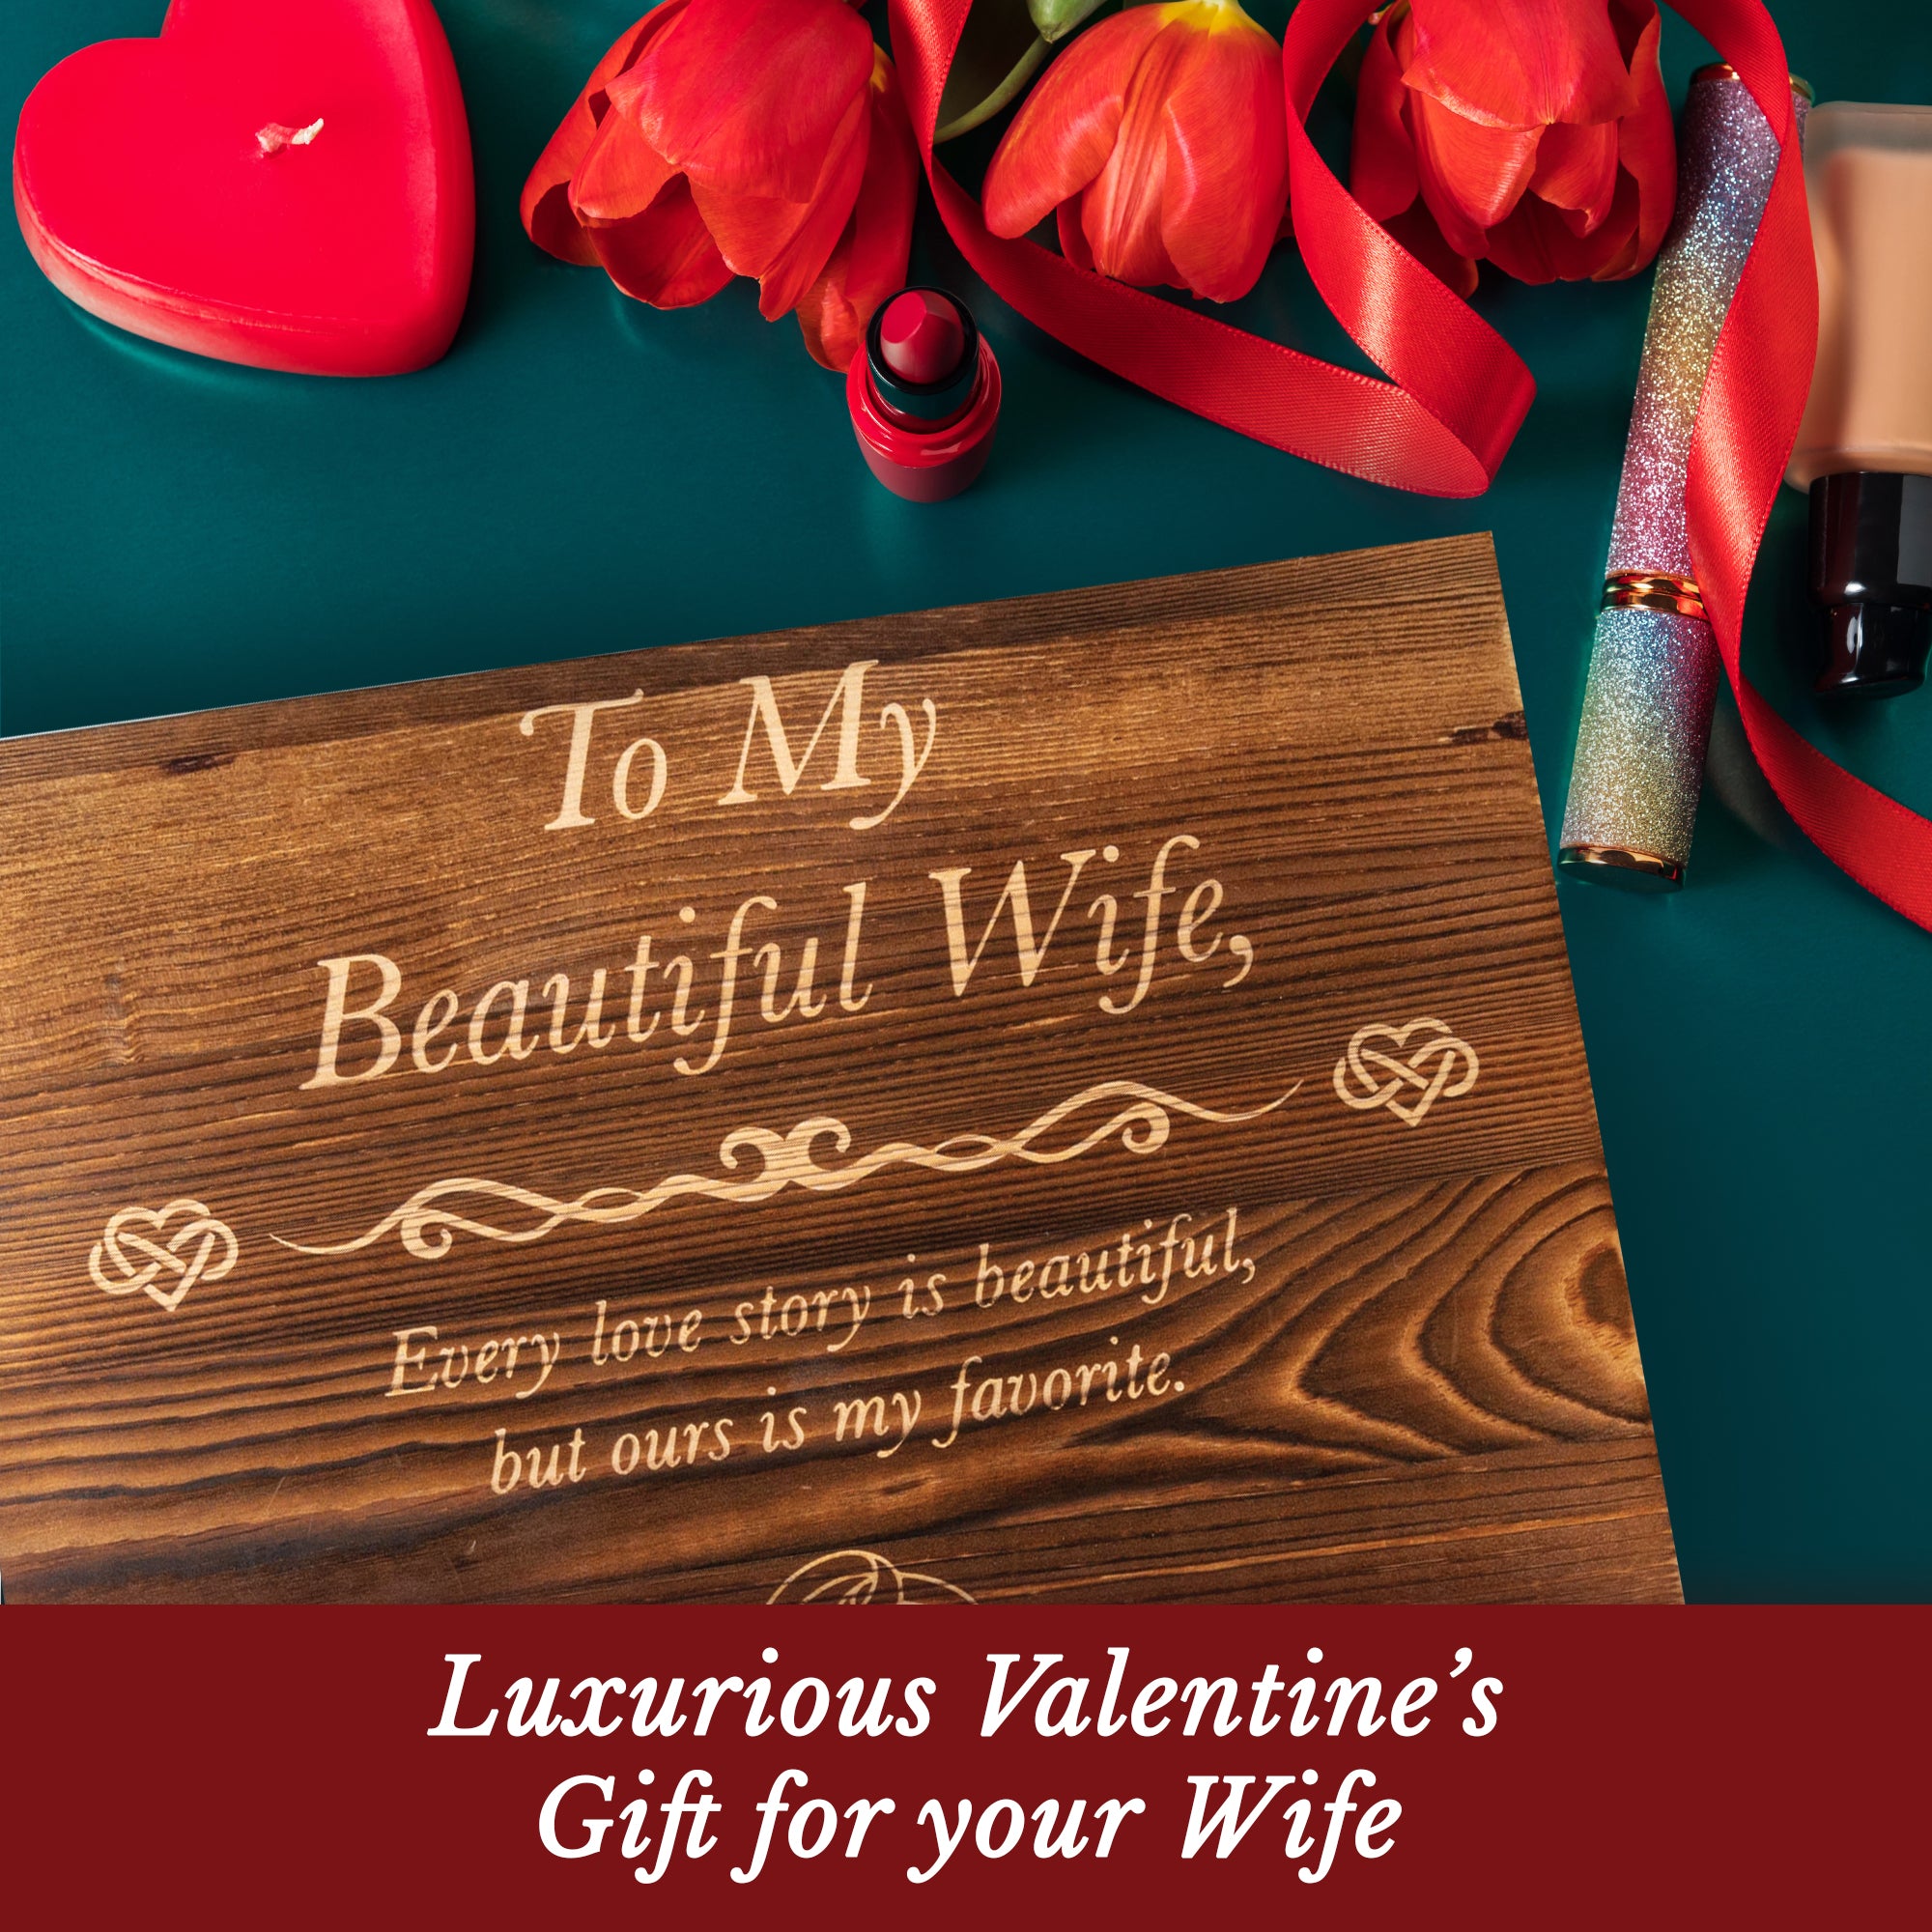 The Perfect Gift For Your Wife- "To My Beautiful Wife" Gift Set